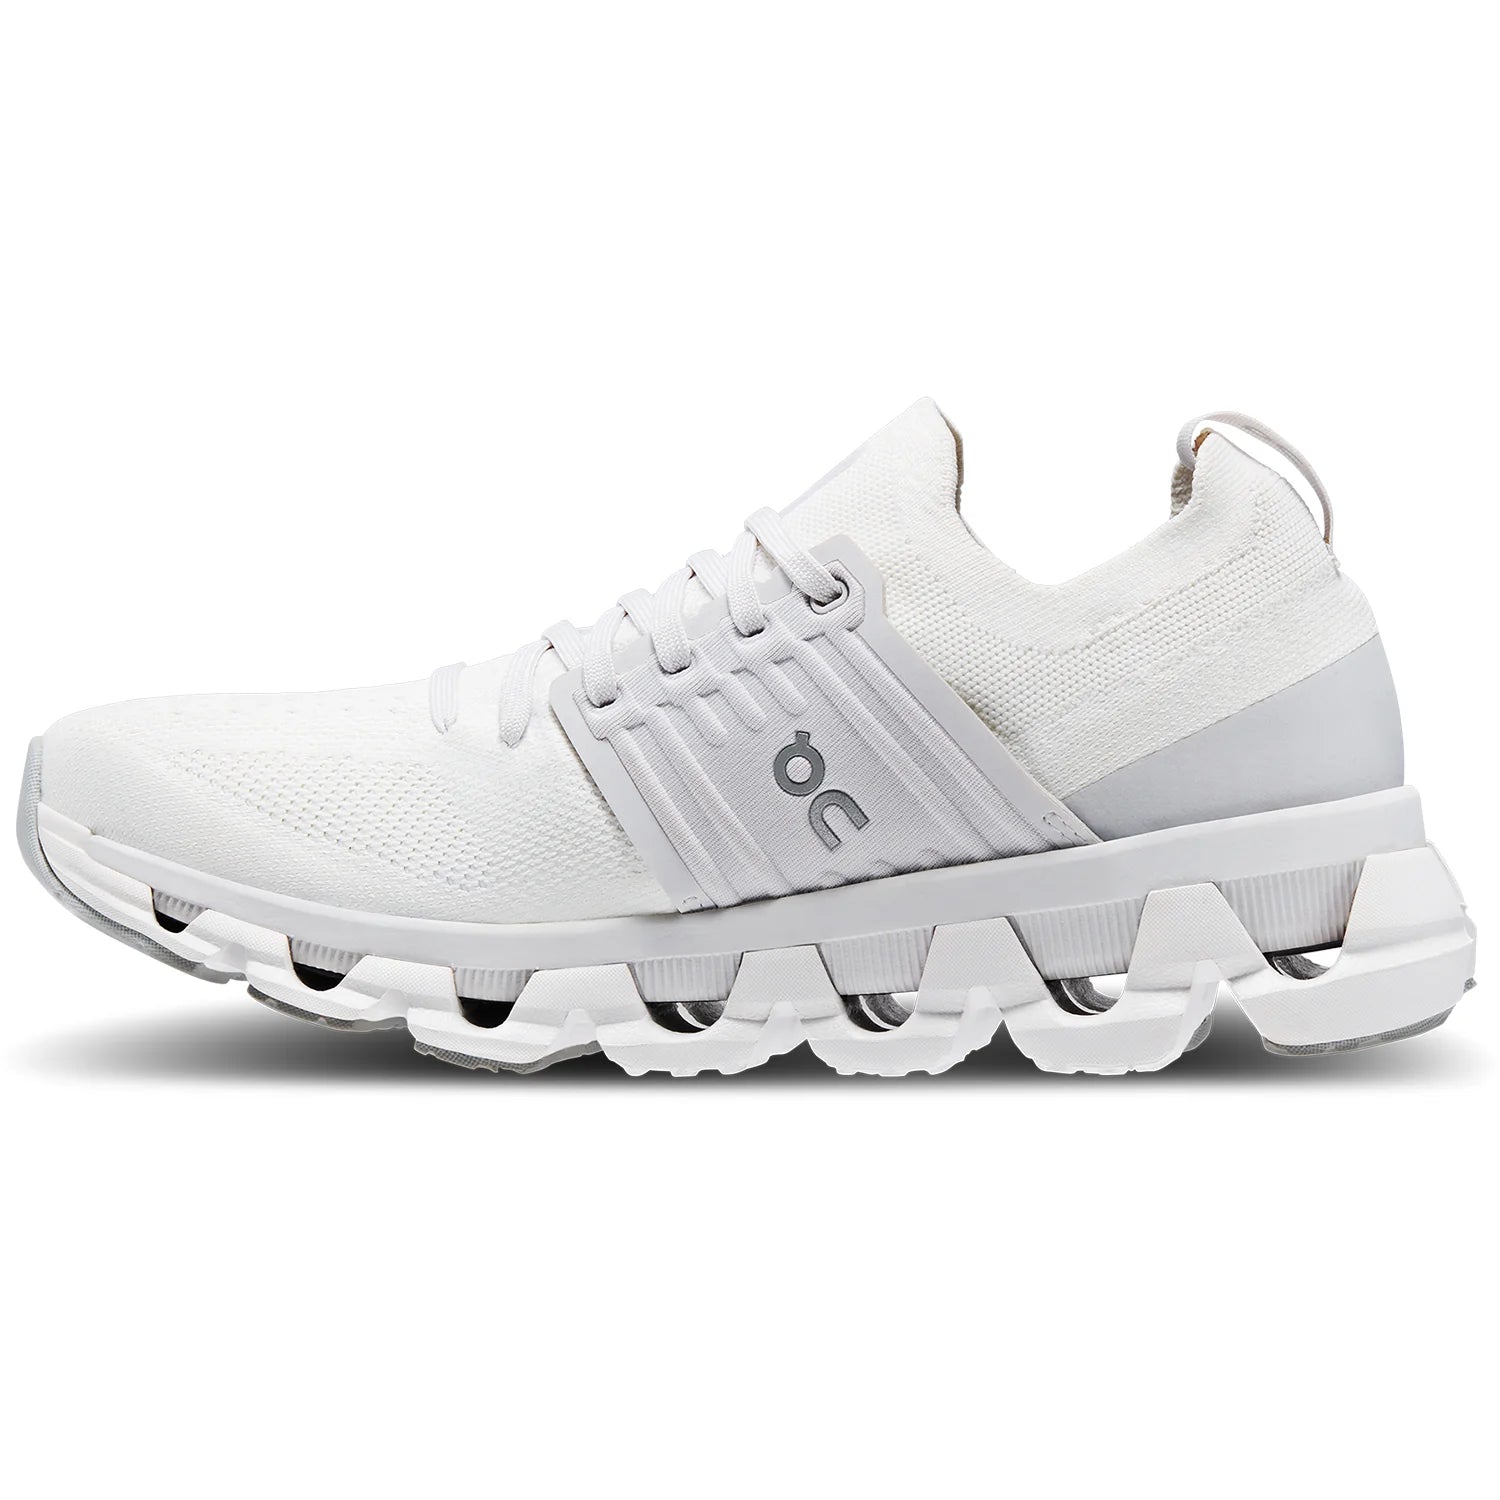 Medial view of the Women's Cloudswift 3 by ON in all white